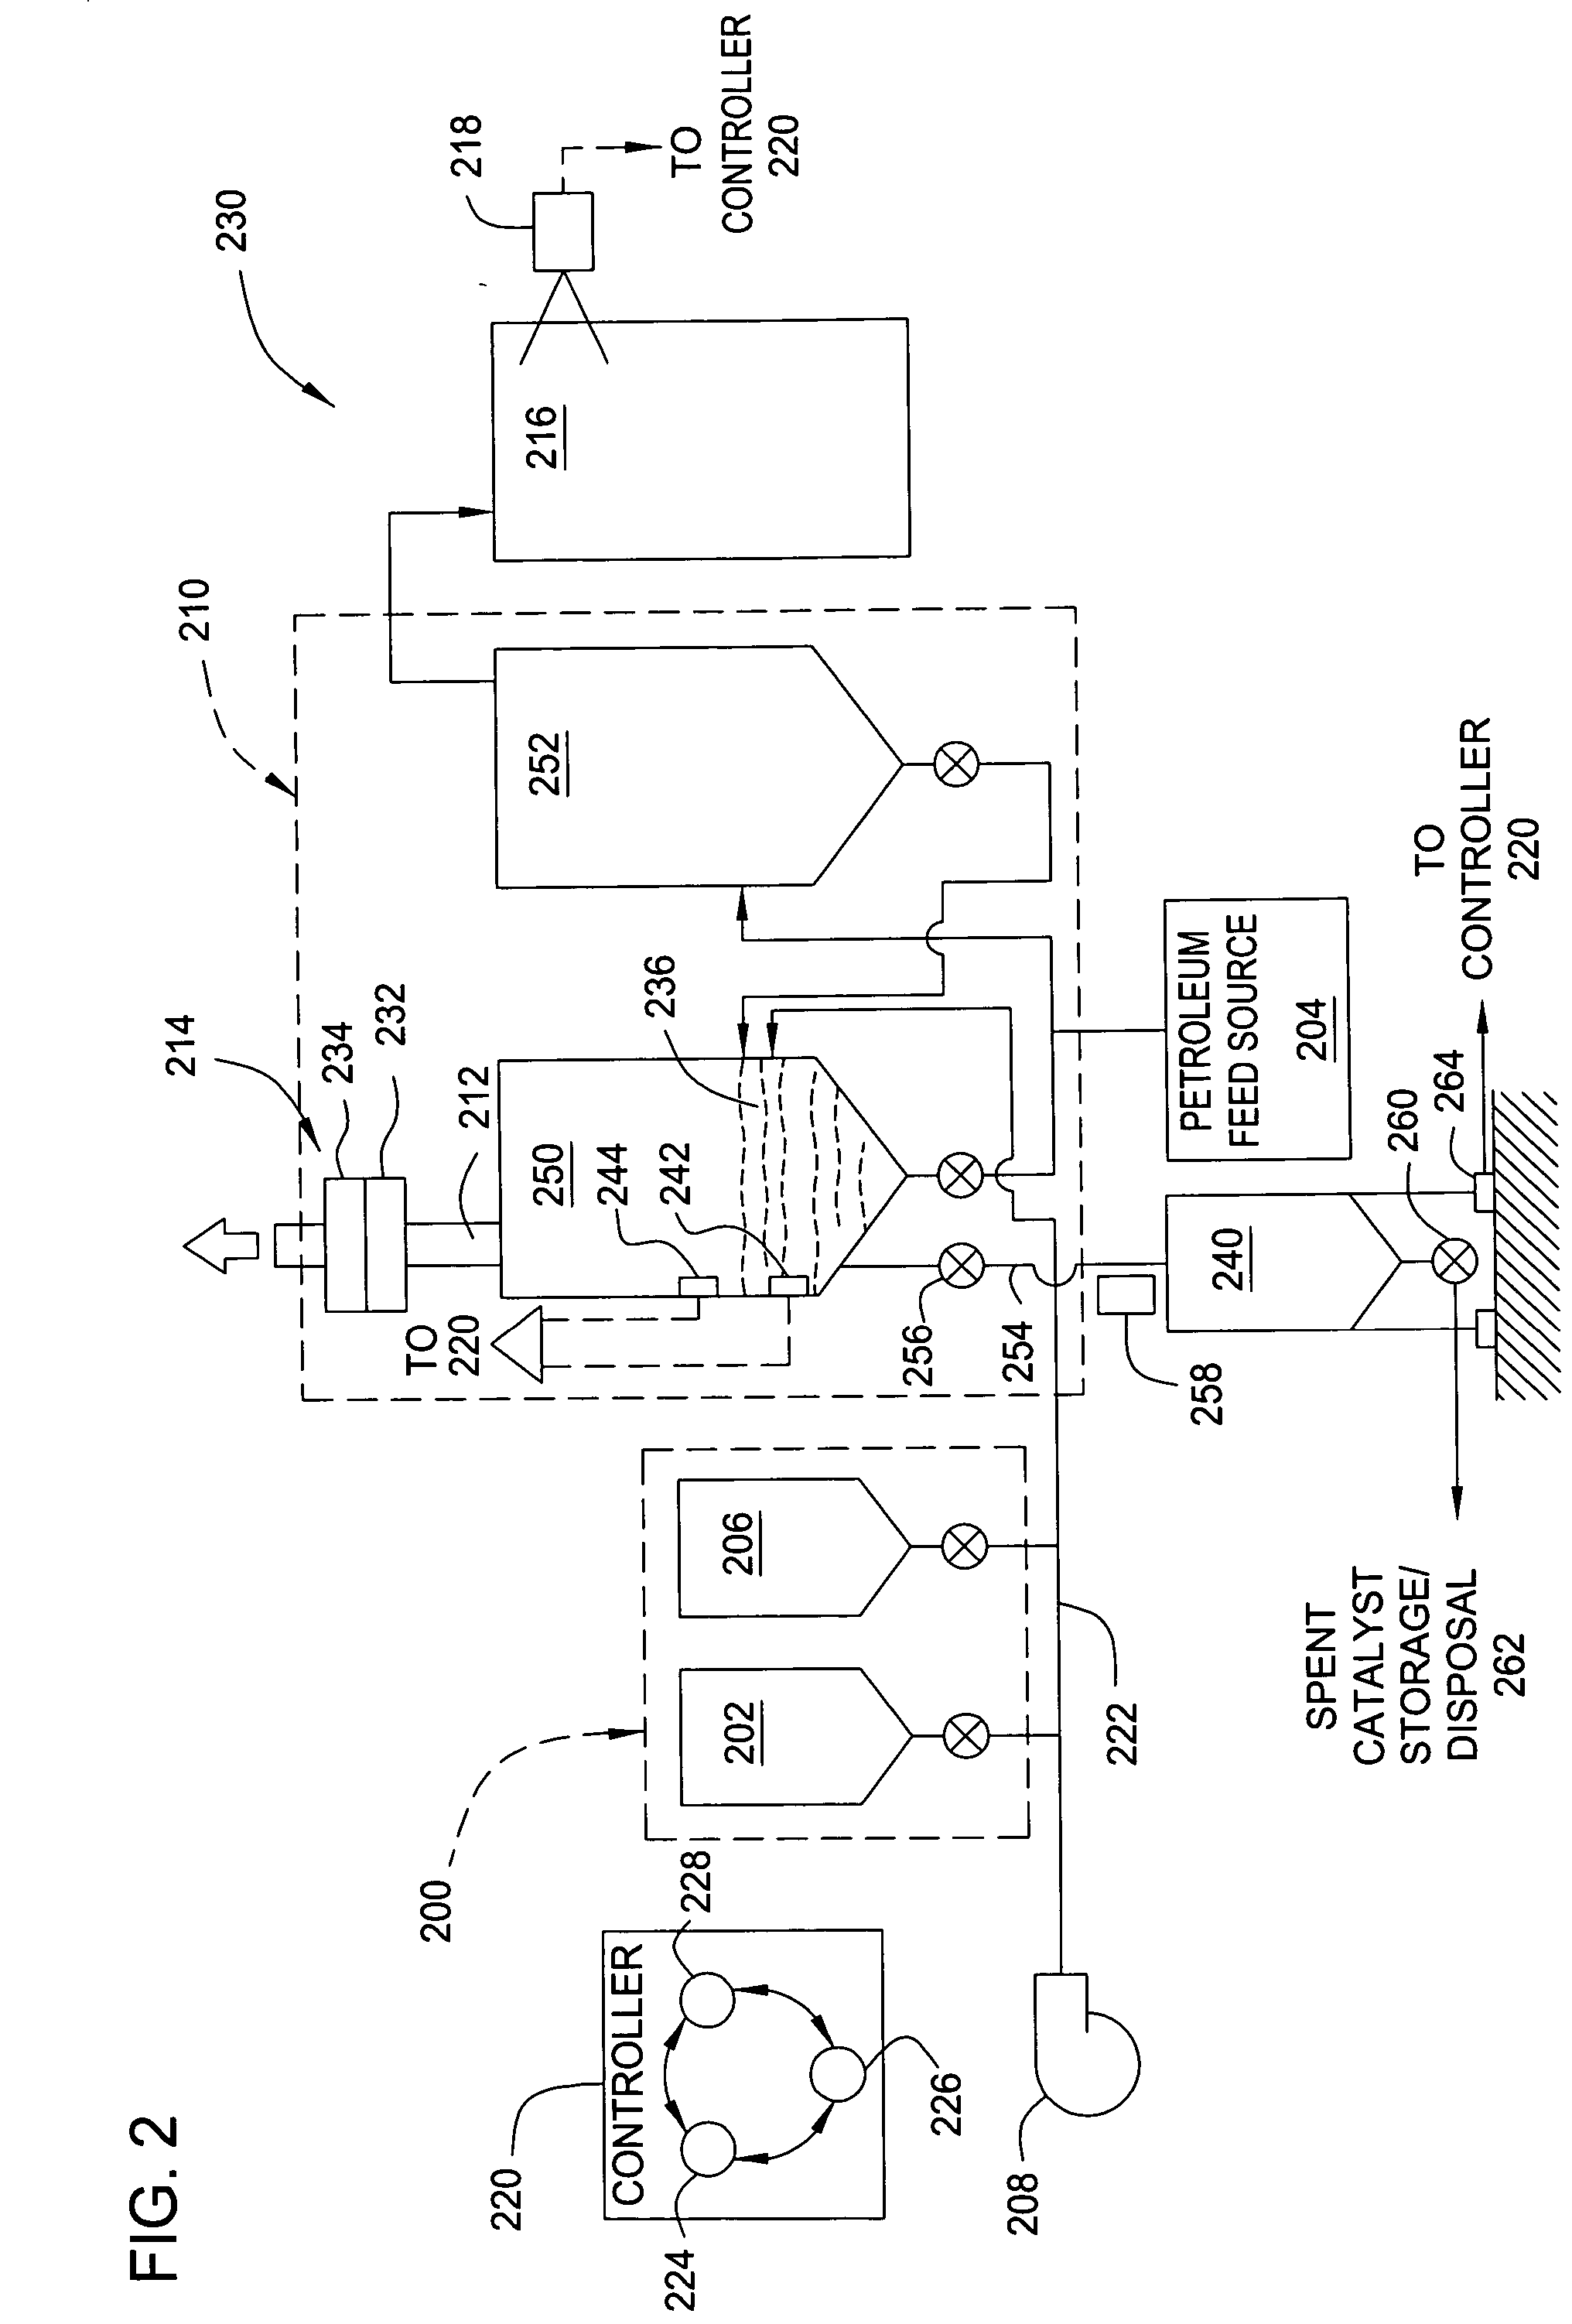 Catalyst withdrawal apparatus and method for regulating catalyst inventory in a fluid catalyst cracking unit